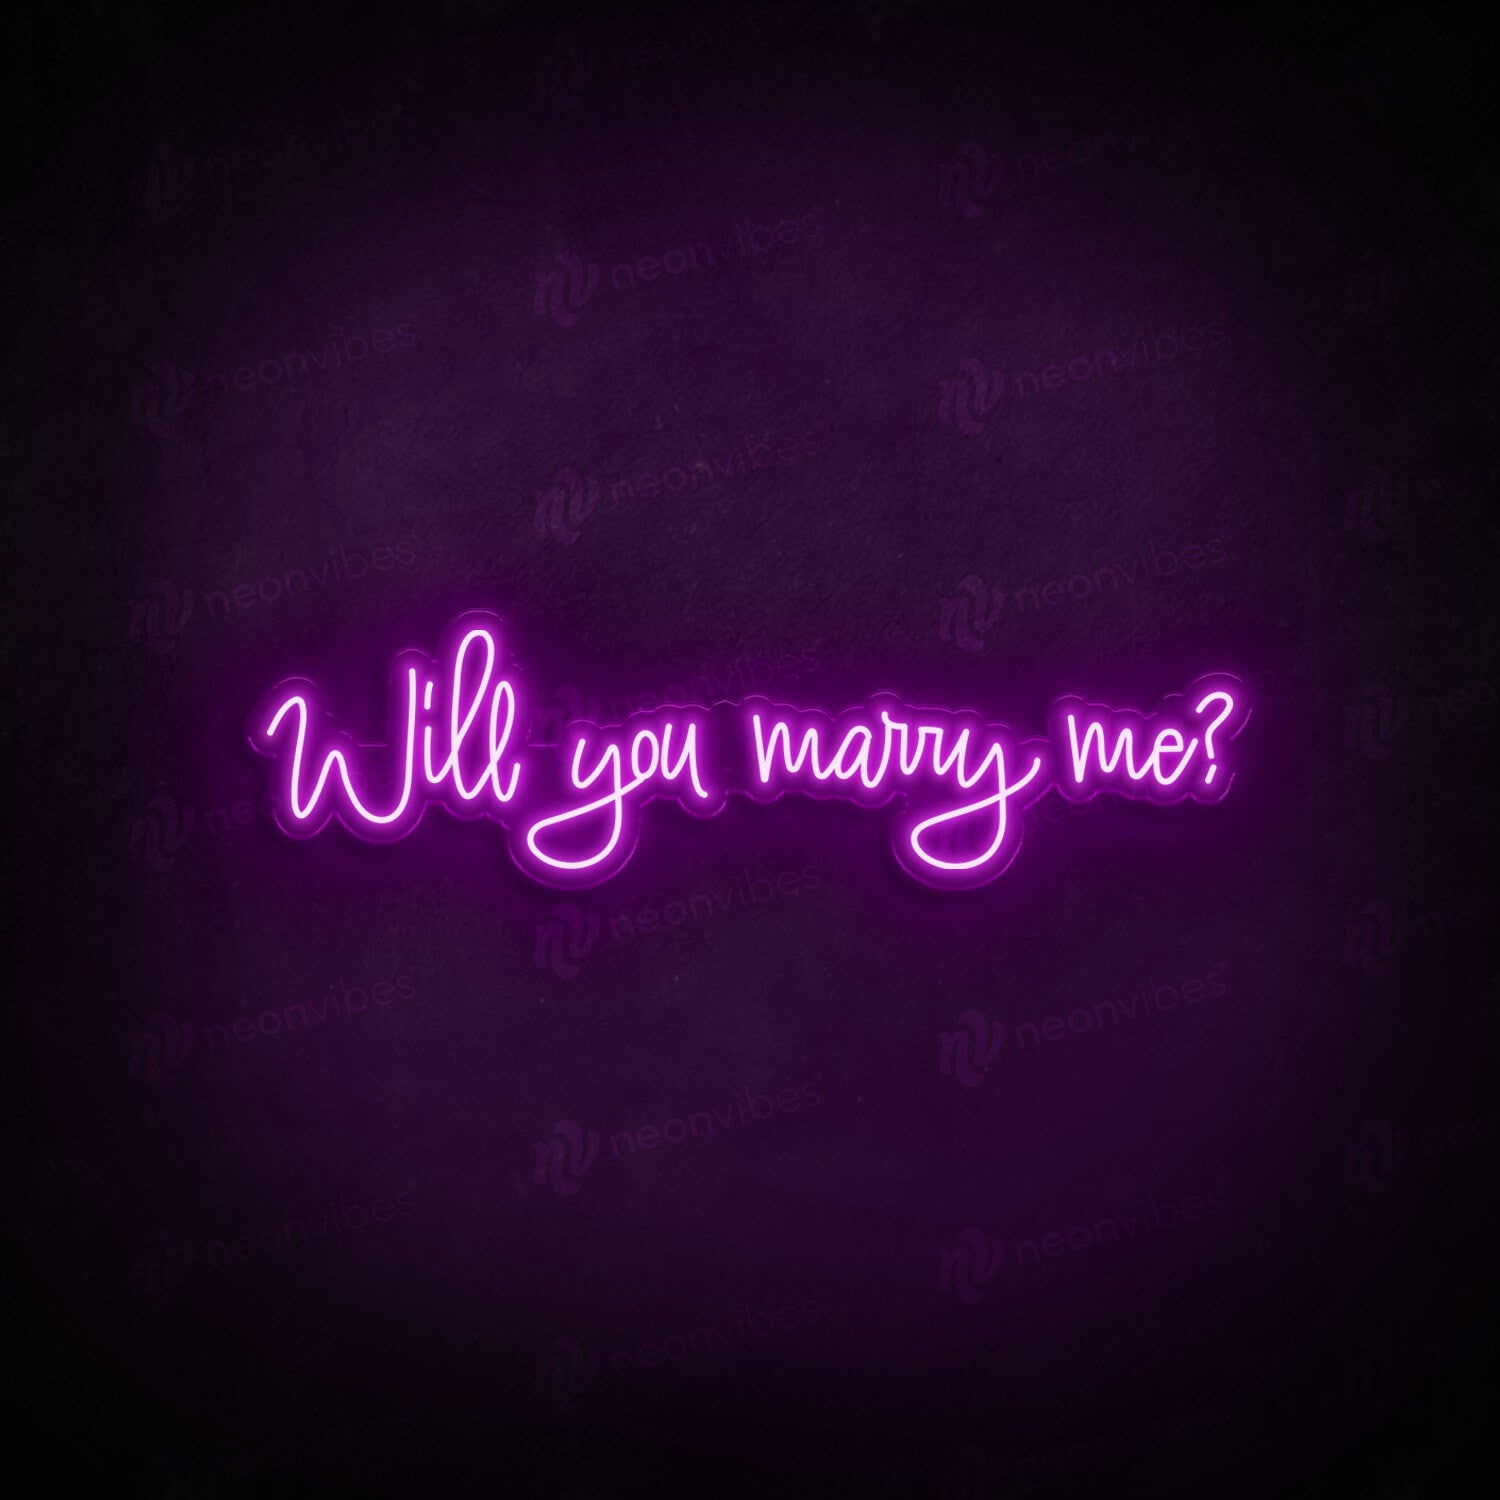 Will you marry me? neon sign